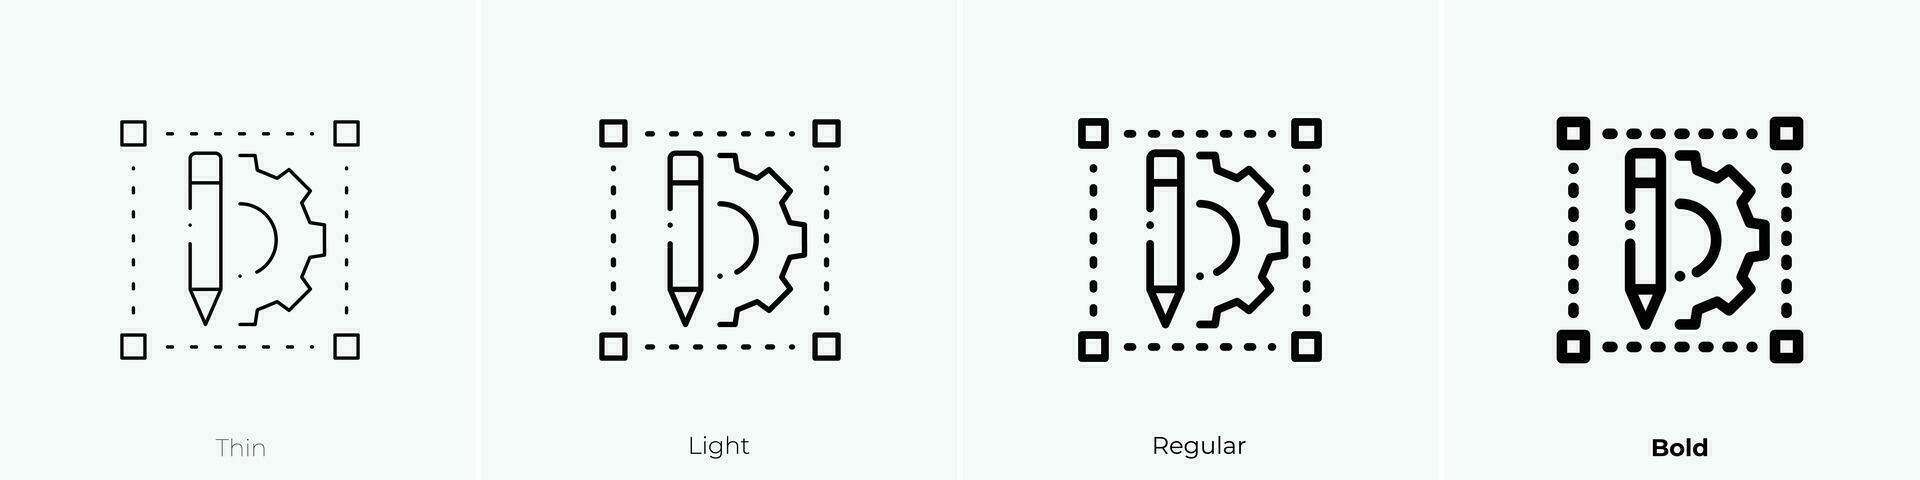 setting icon. Thin, Light, Regular And Bold style design isolated on white background vector